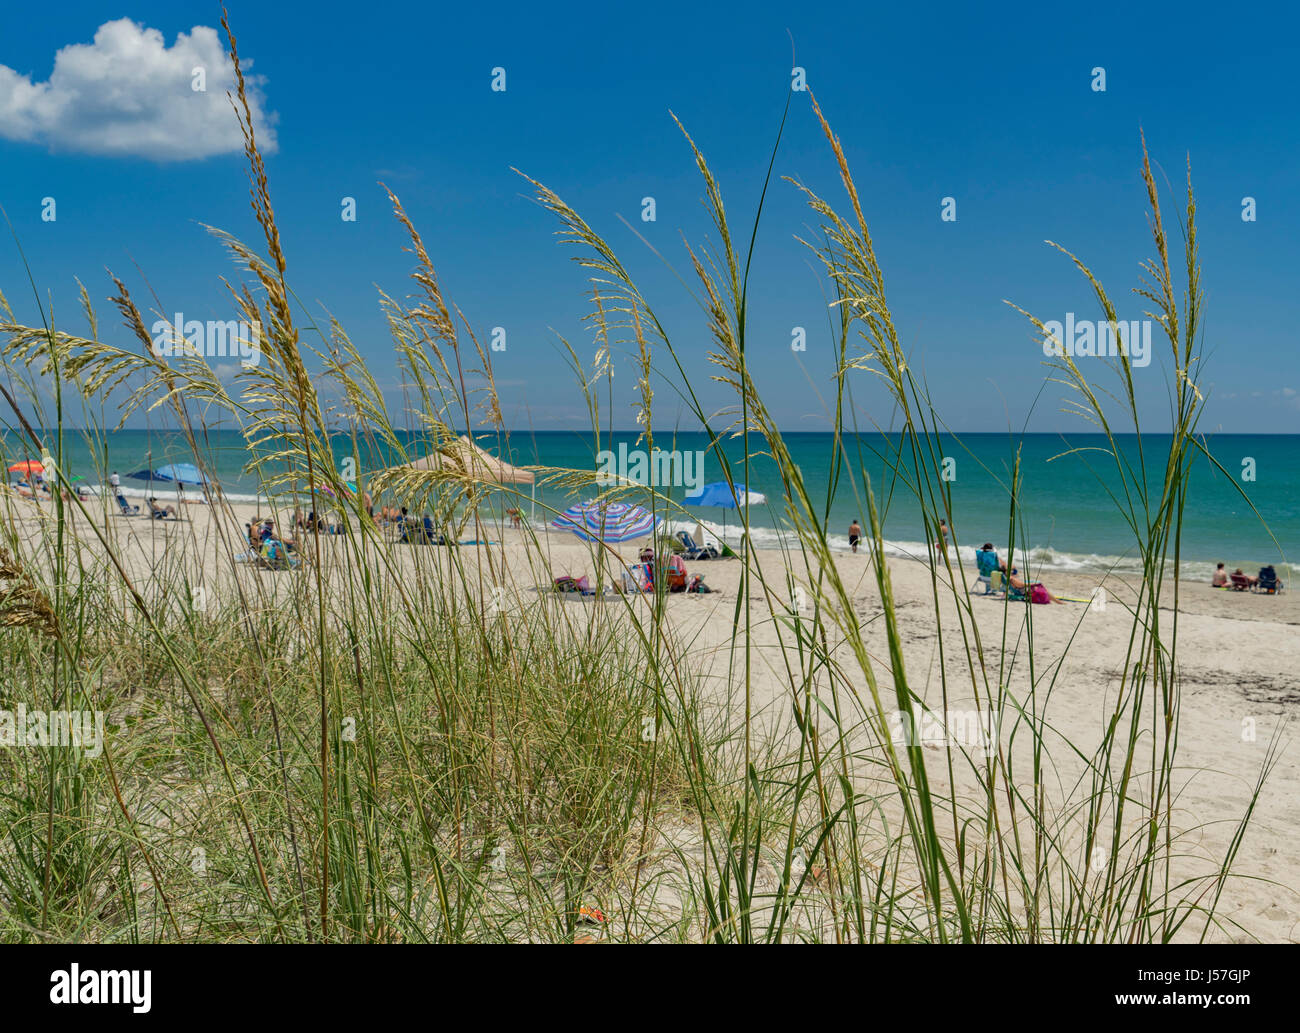 A perfect day at the beach in Melbourne, Florida Stock Photo